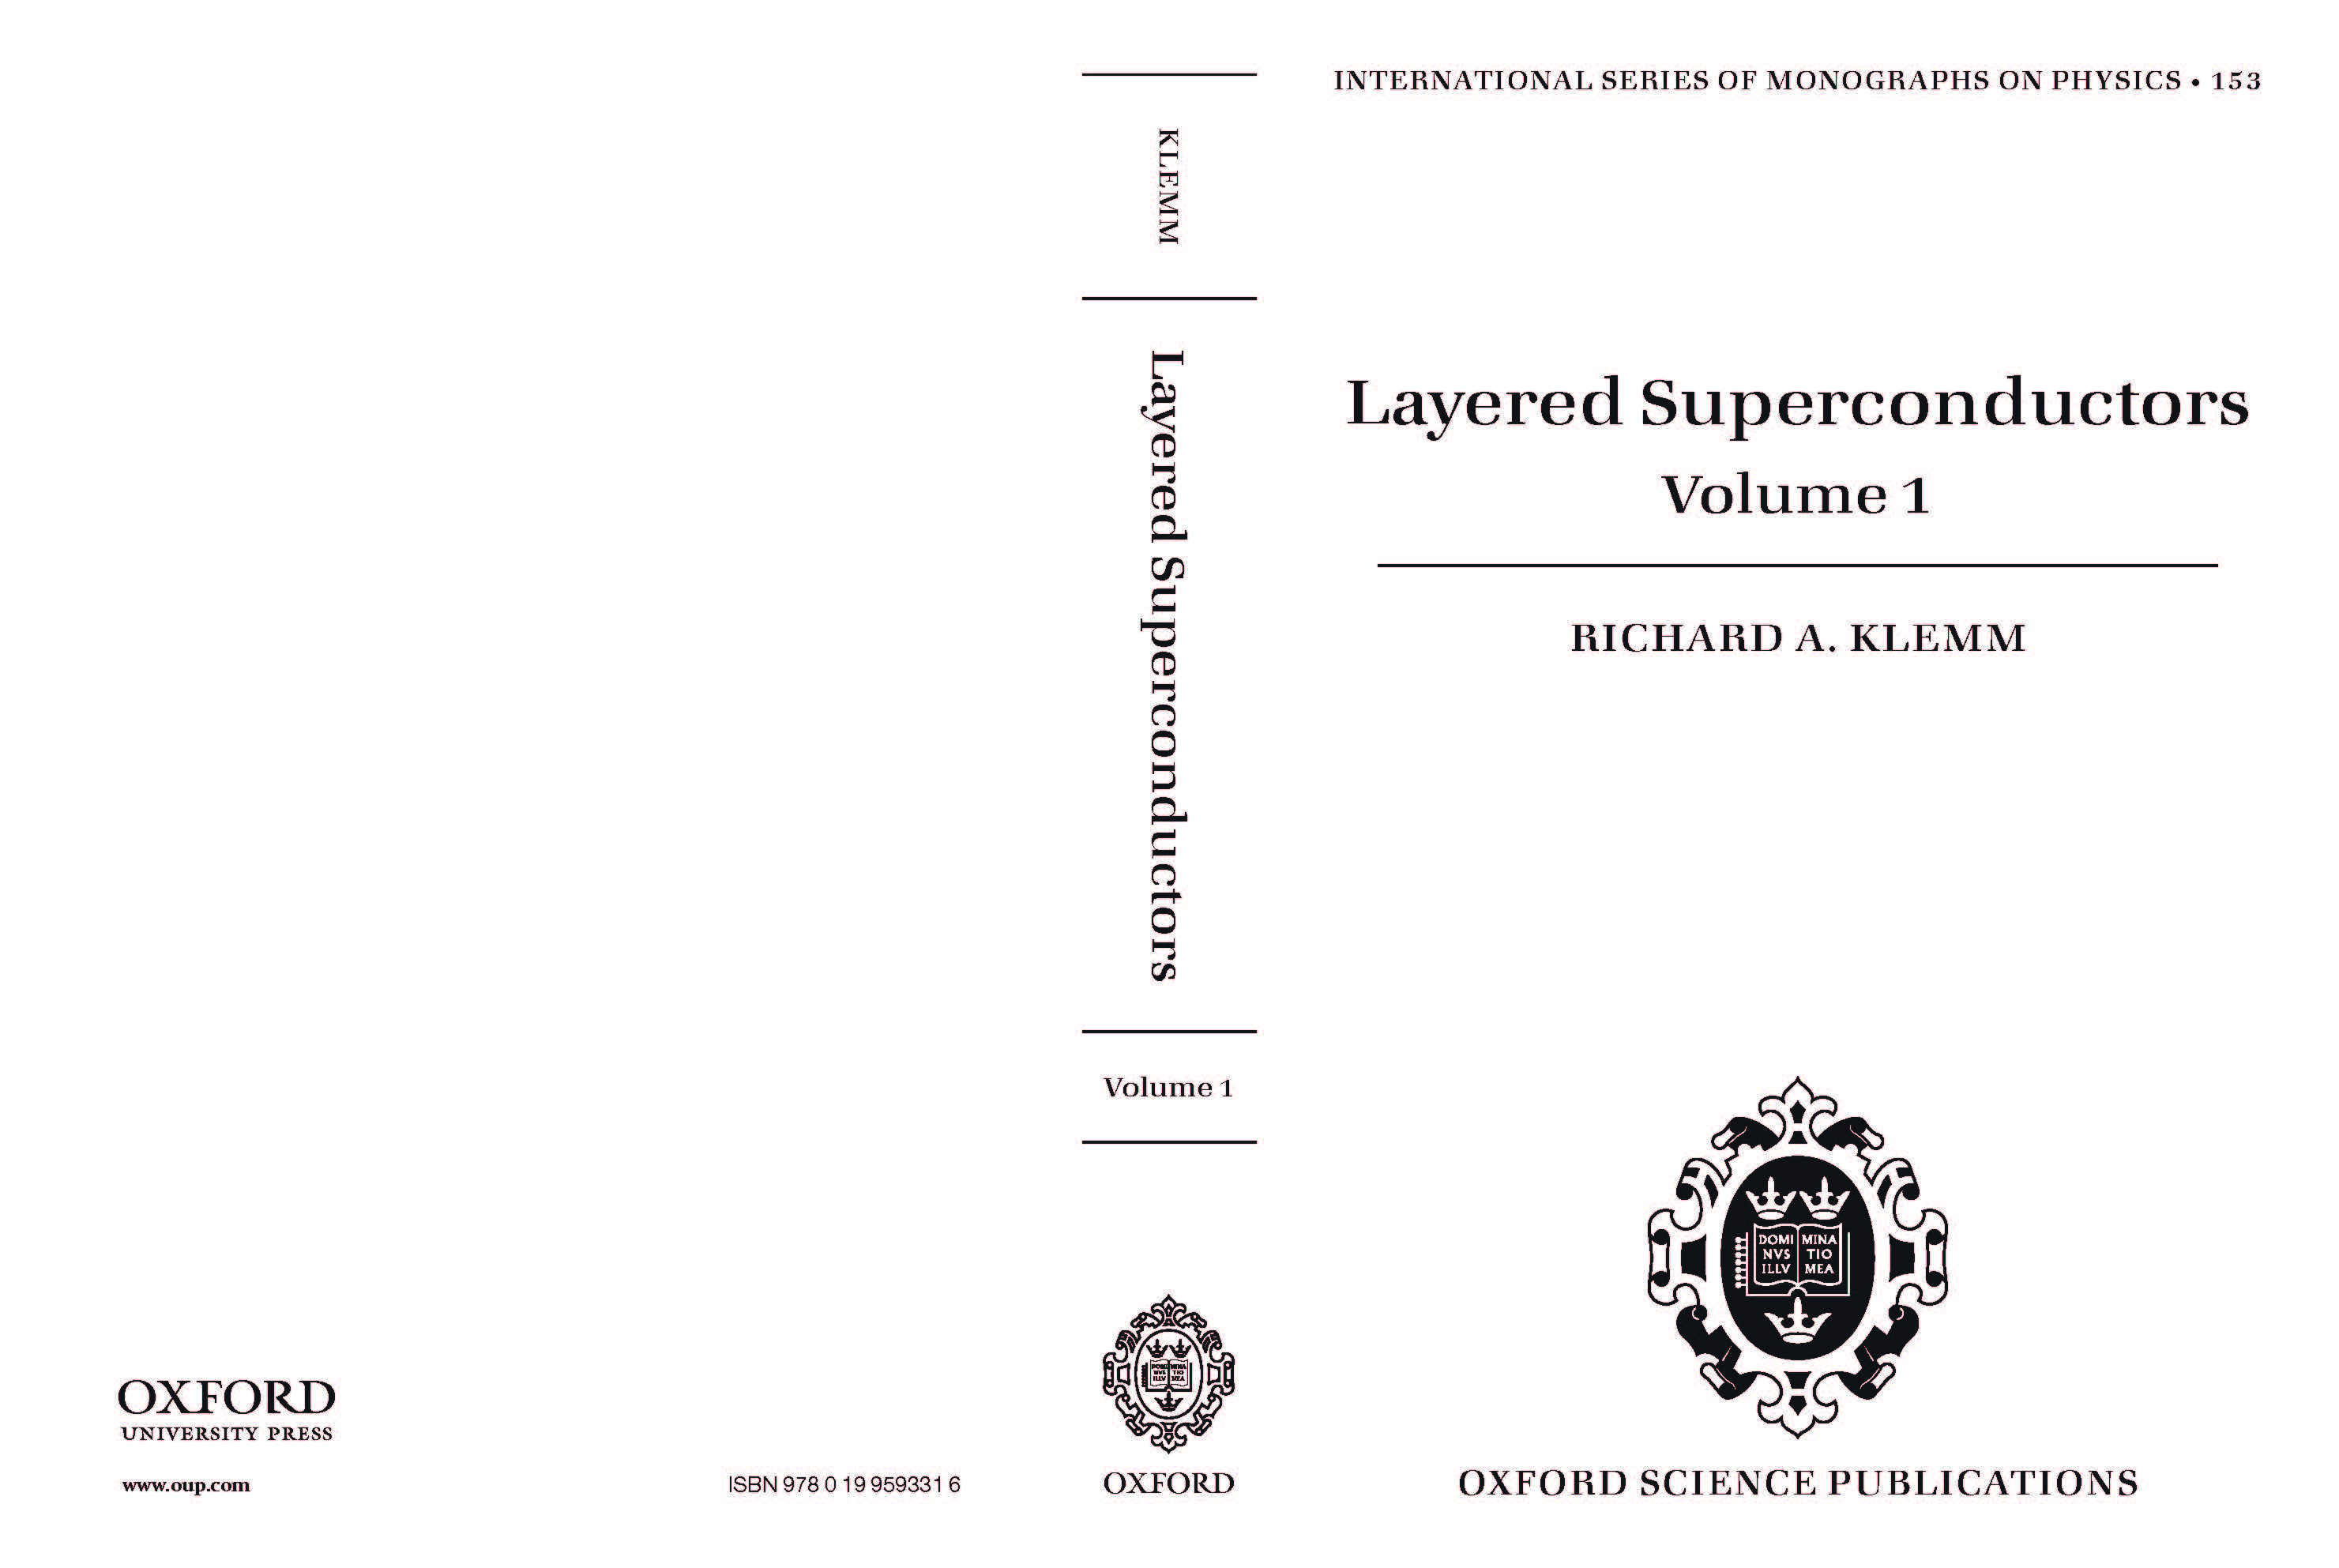 Layered Superconductors Volume 1 book cover